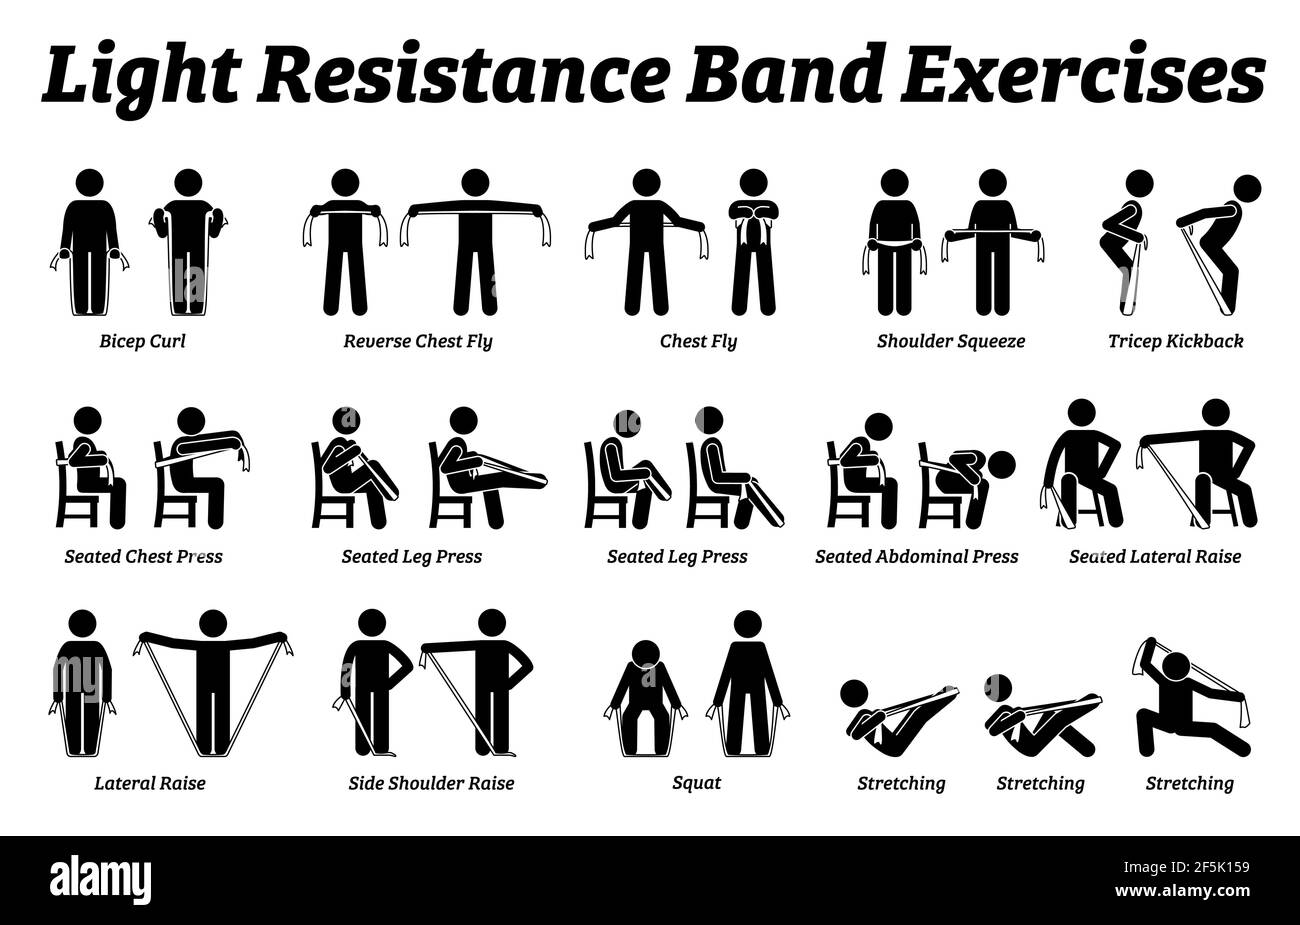 Light resistance band exercises and stretch workout techniques in step by step. Vector illustrations of stretching exercises poses, postures, and meth Stock Vector